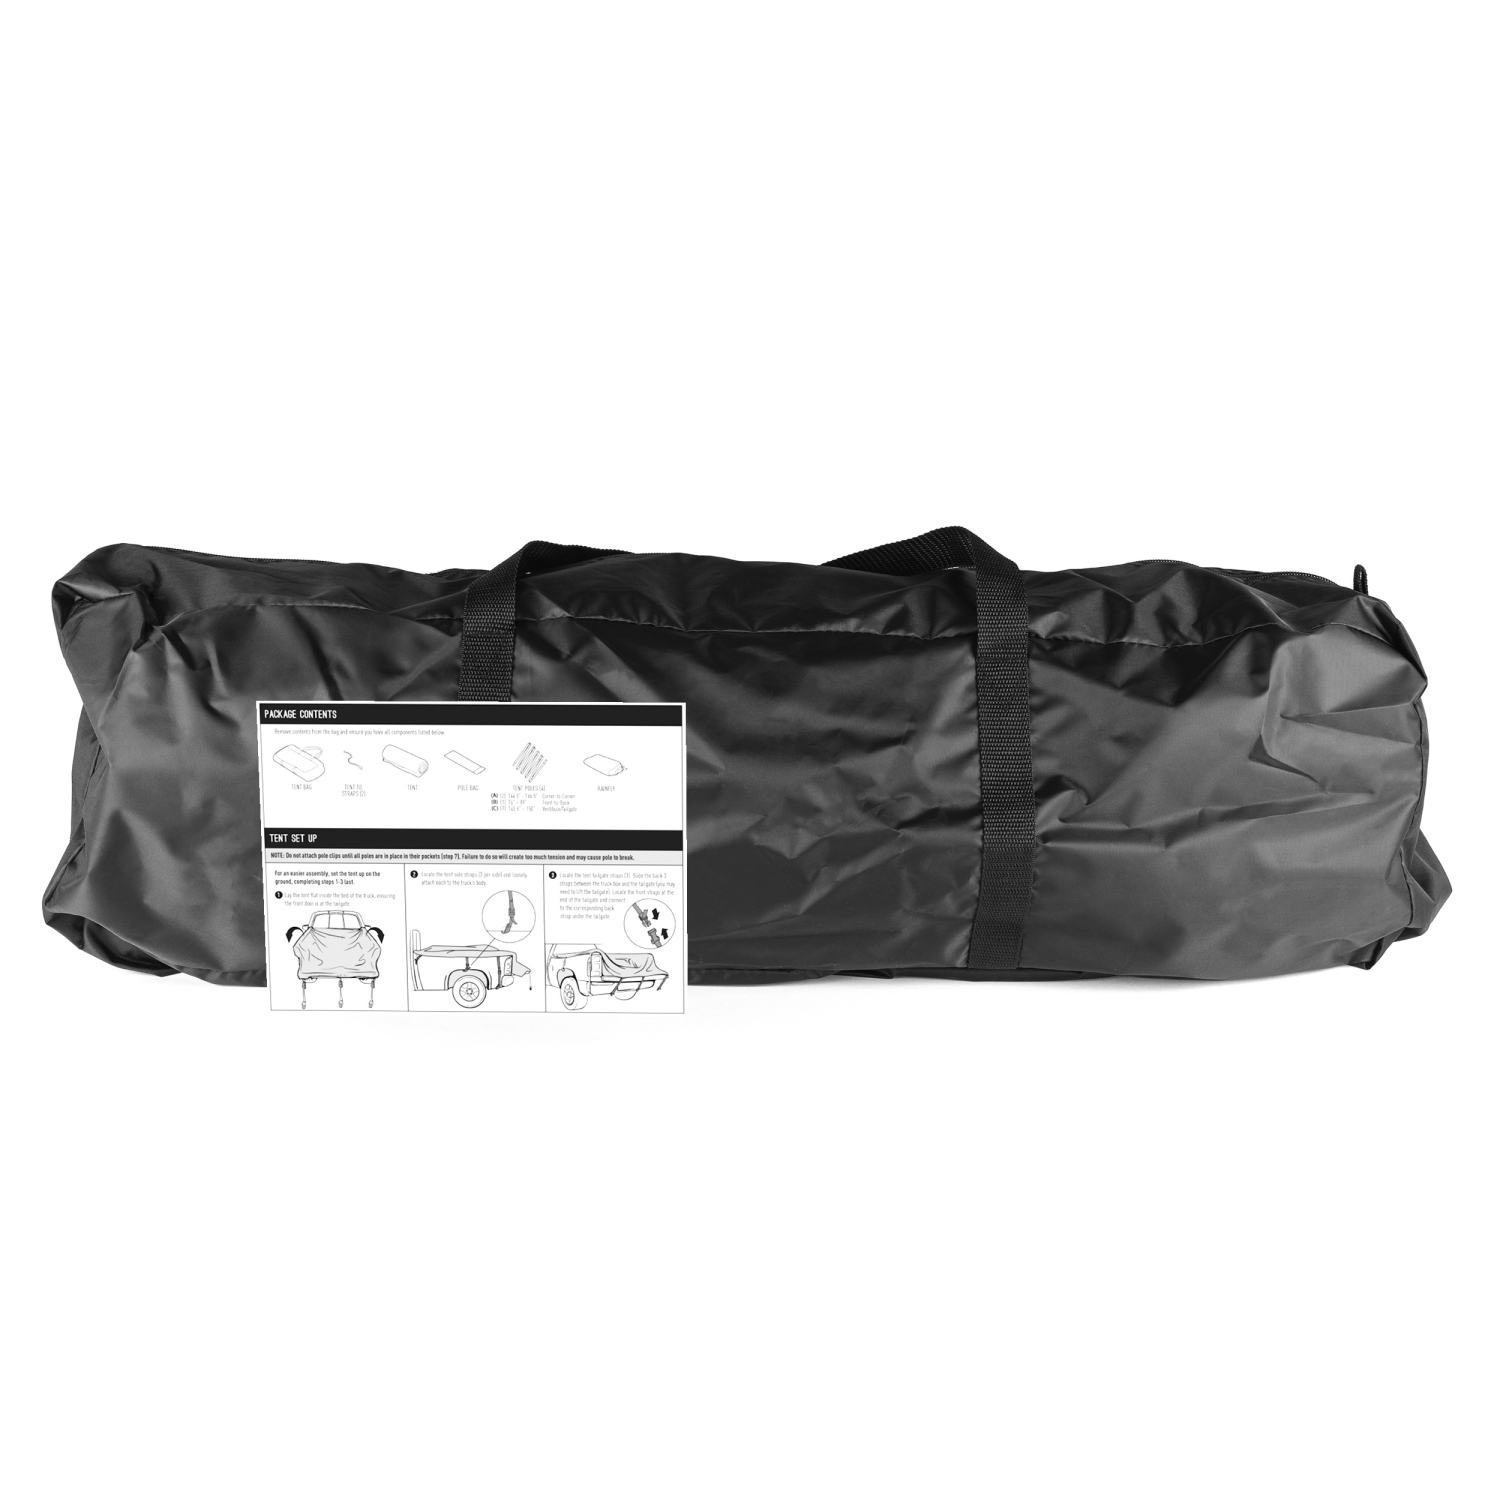 2-Person Pickup Truck Tent 6.4’-6.7’ Portable Truck Bed Tent with Removable  Rainfly & Carrying Bag